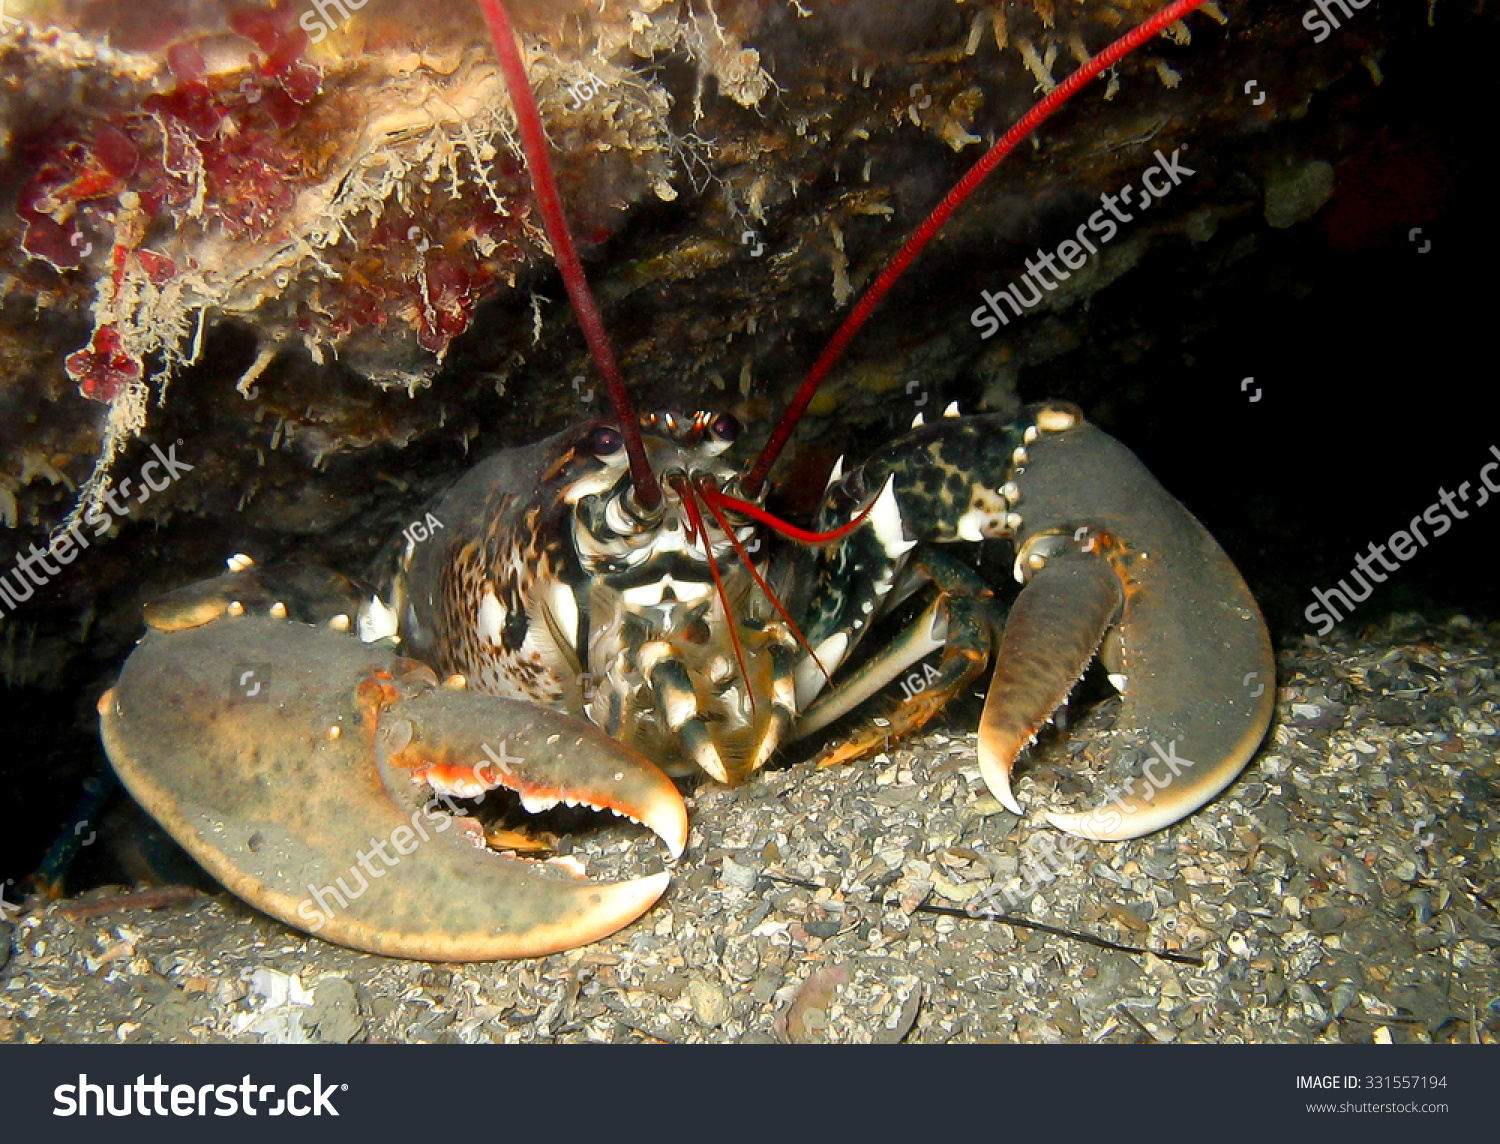 Common European Lobster underwater in a cave under a ship wreck with giant claws. #331557194